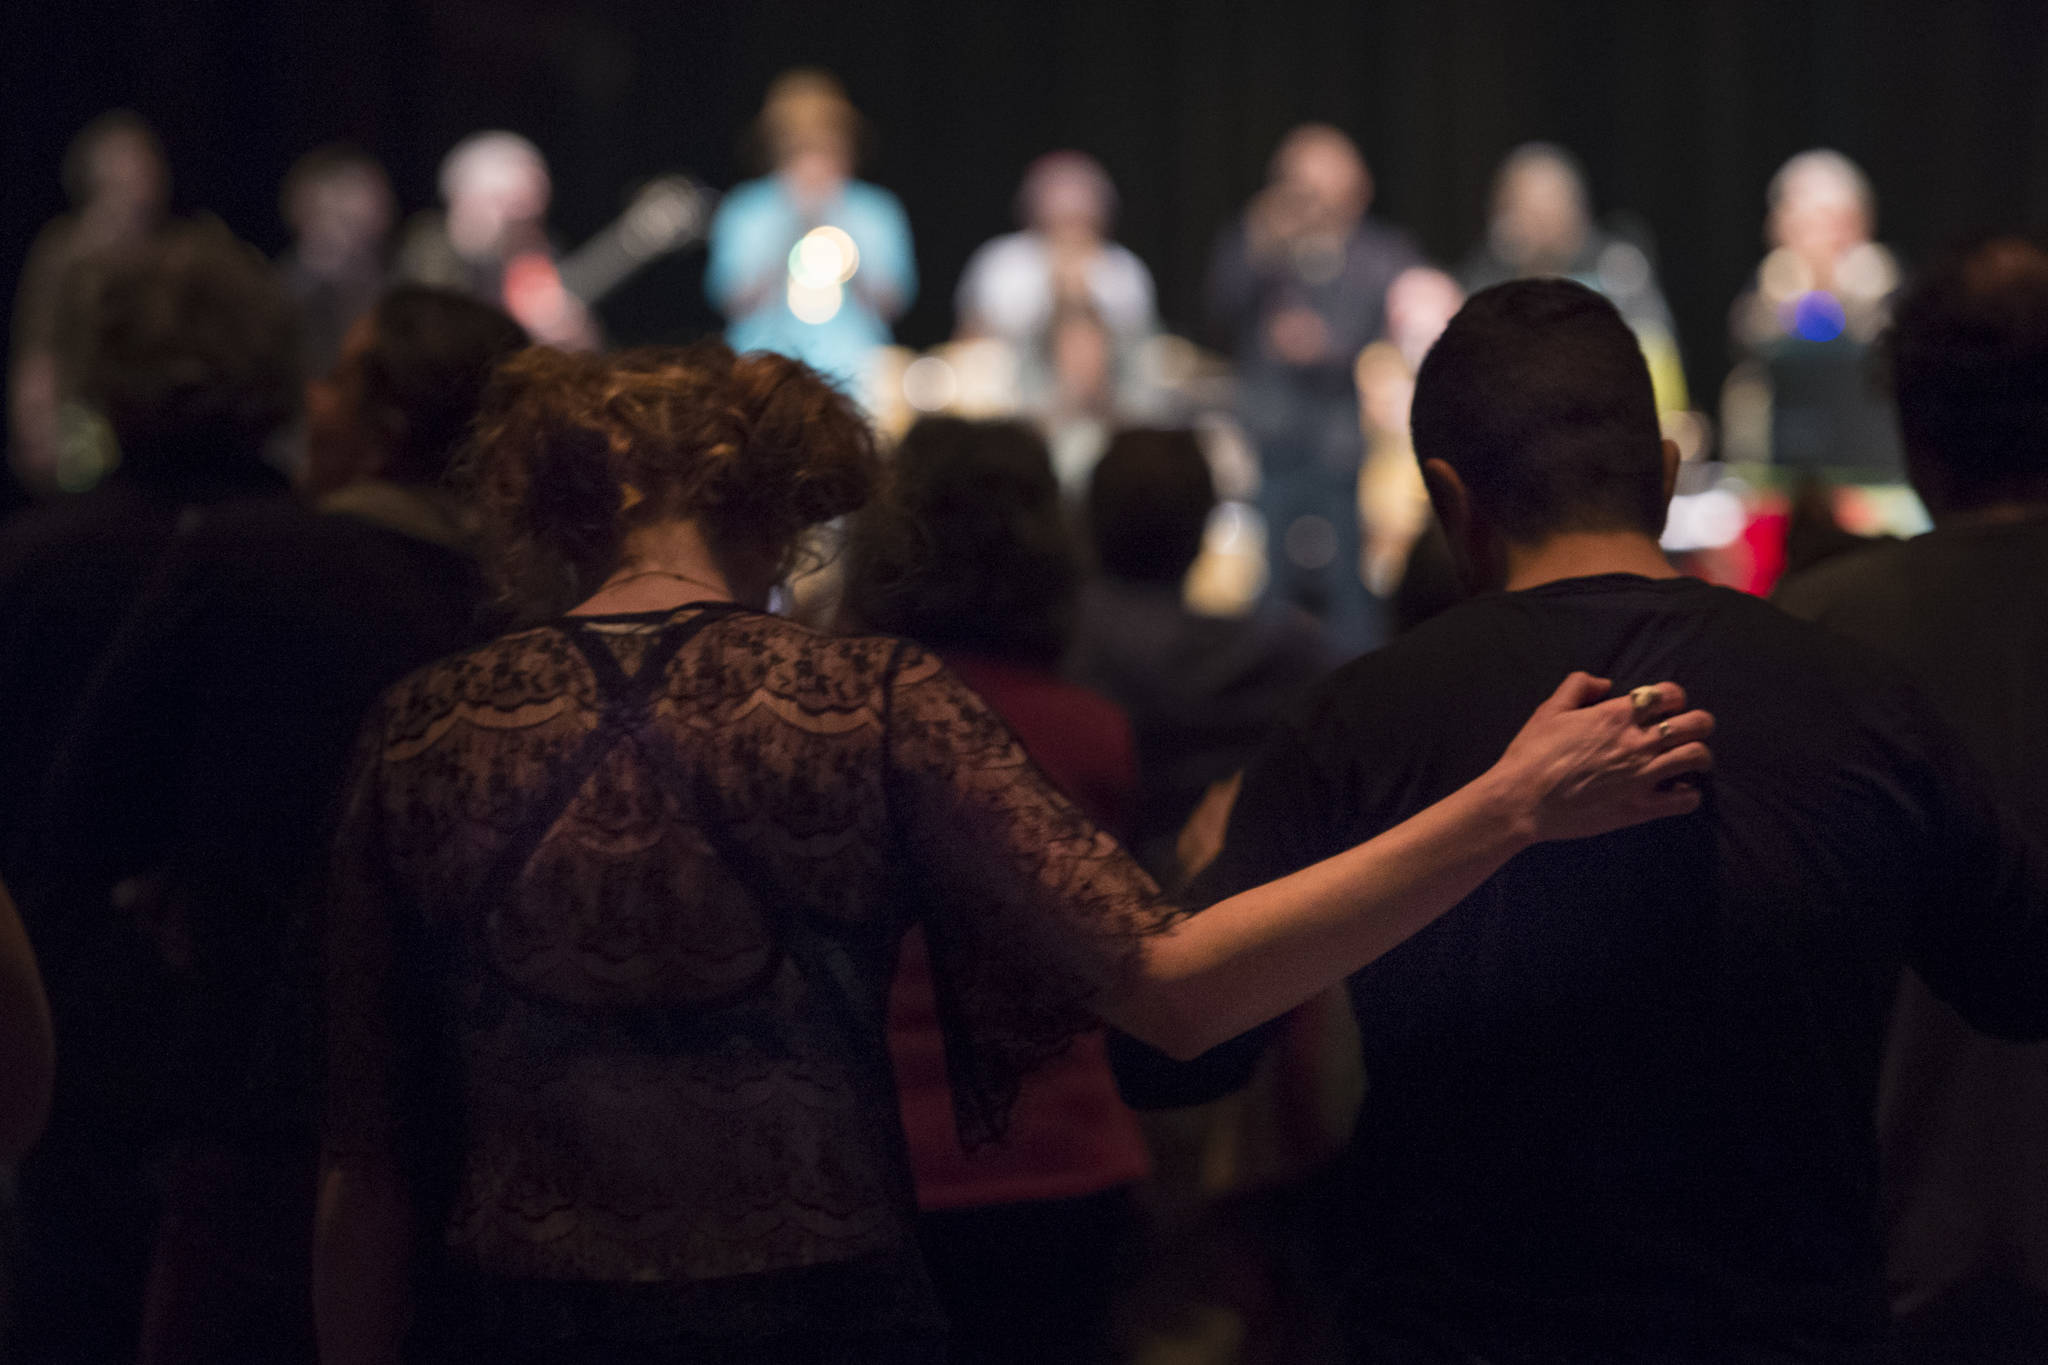 Audience members stand to a prayer song performed by Khu.eex’ at Centennial Hall on Monday, Jan. 28, 2019. (Michael Penn | Juneau Empire)